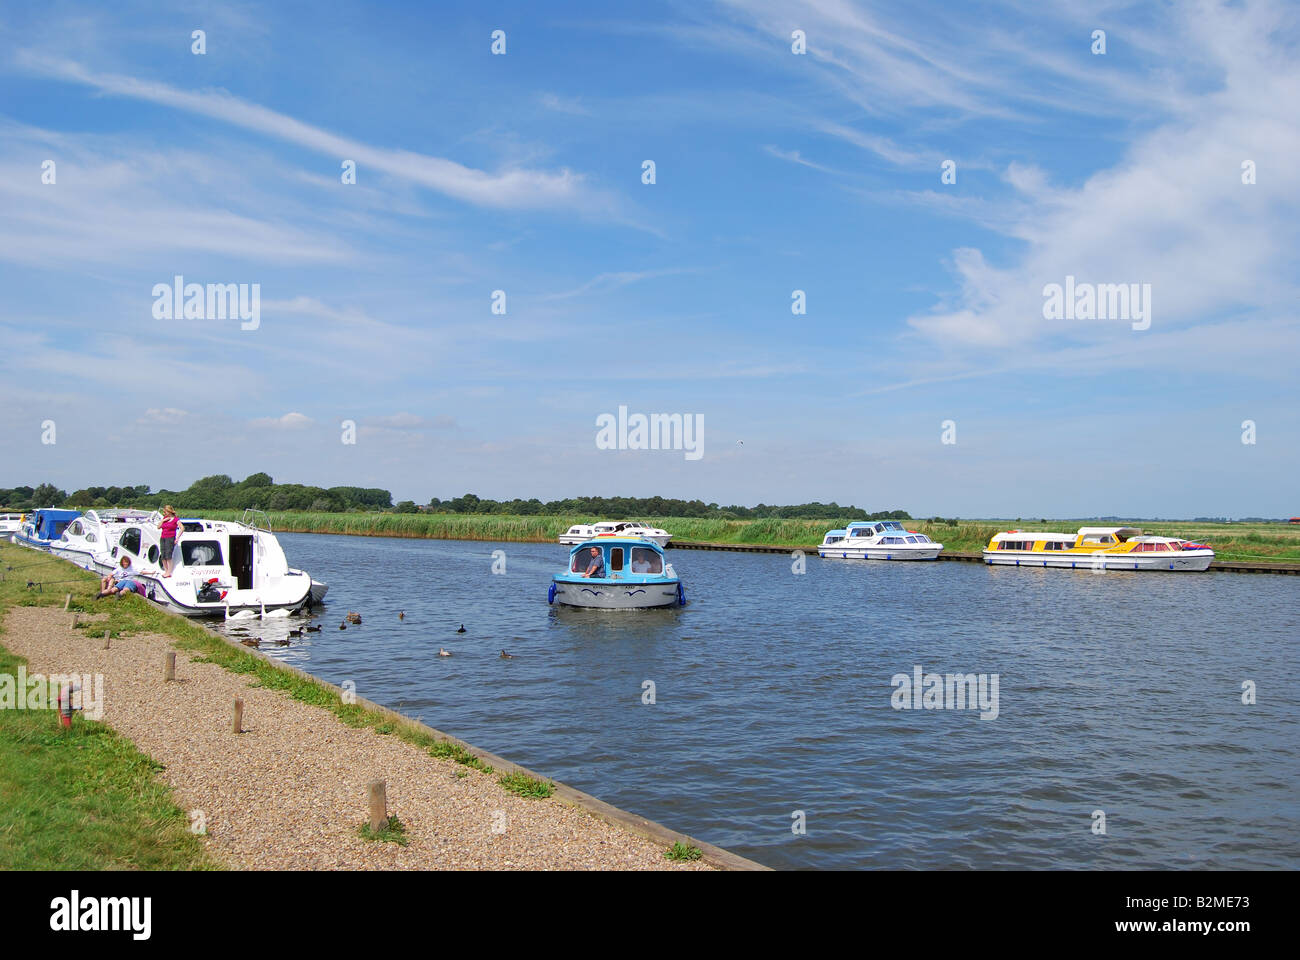 Boats on River Bure à Acle Pont, Norfolk Broads, Norfolk, Angleterre, Royaume-Uni Banque D'Images